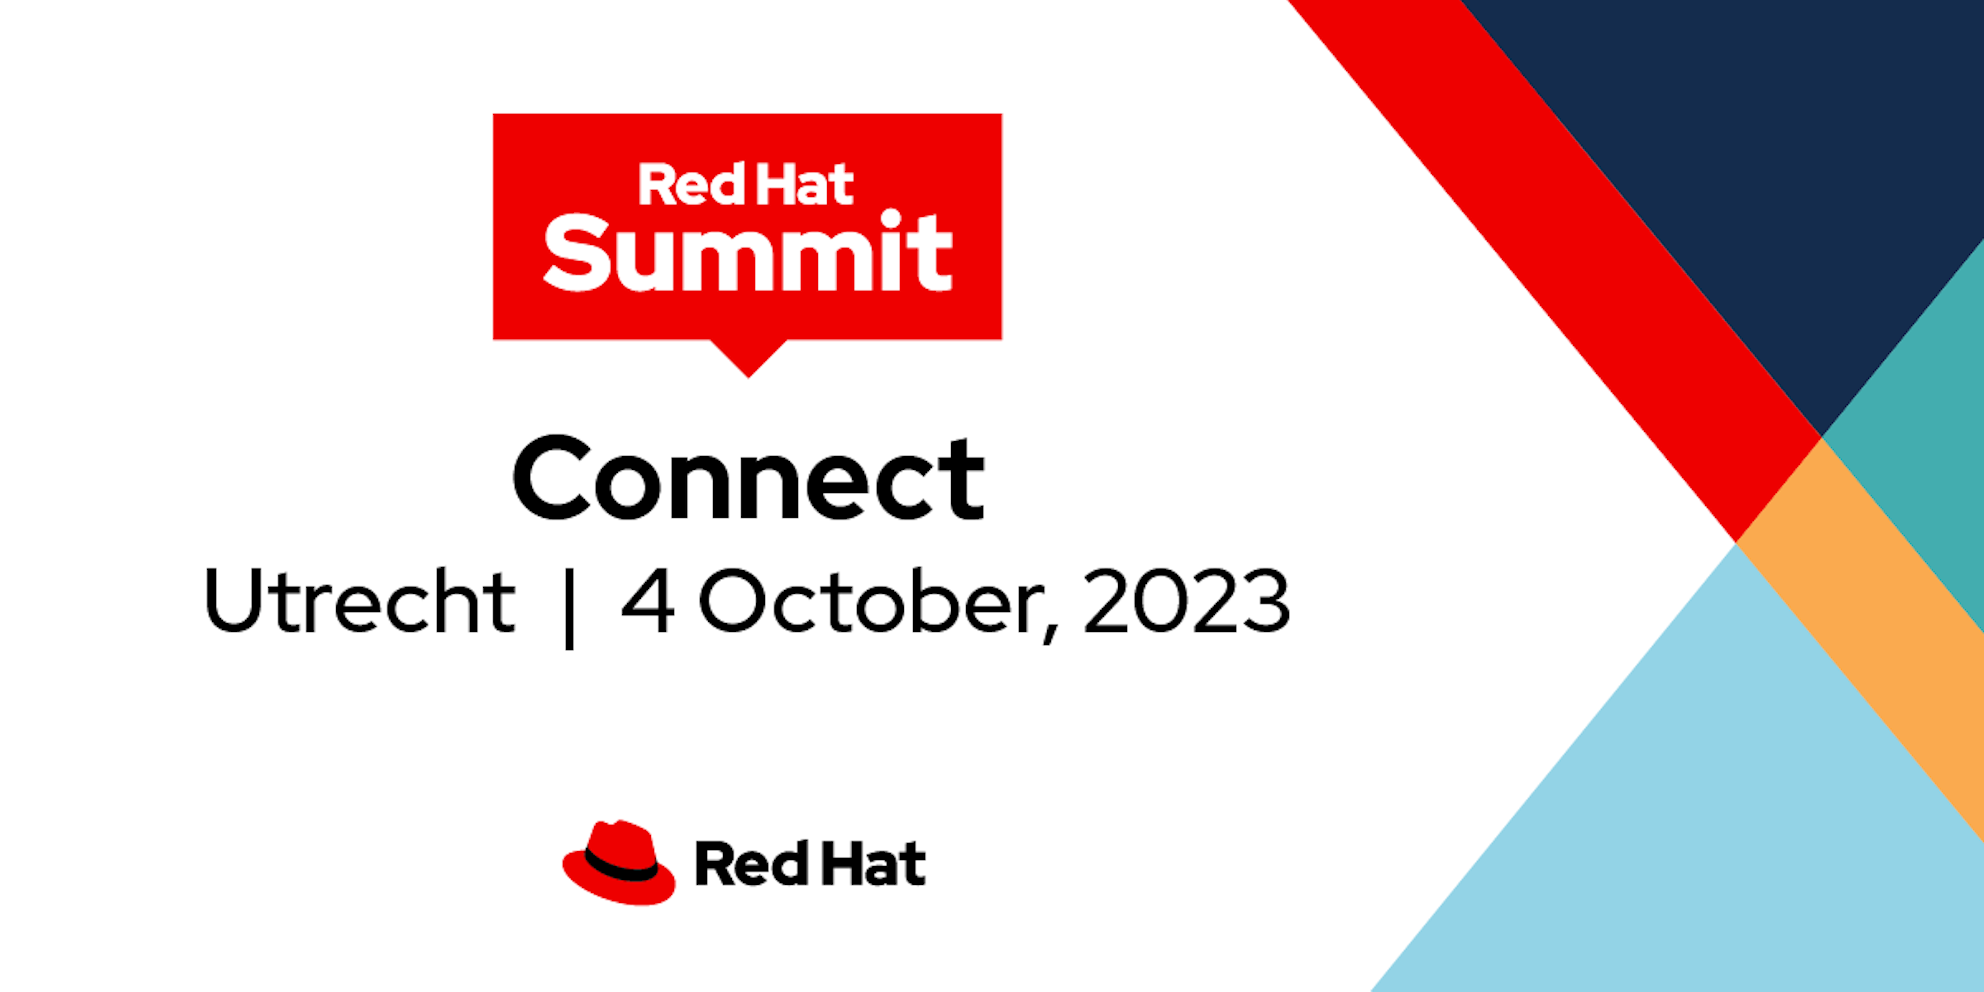 Afbeelding Red Hat Summit Connect 2023